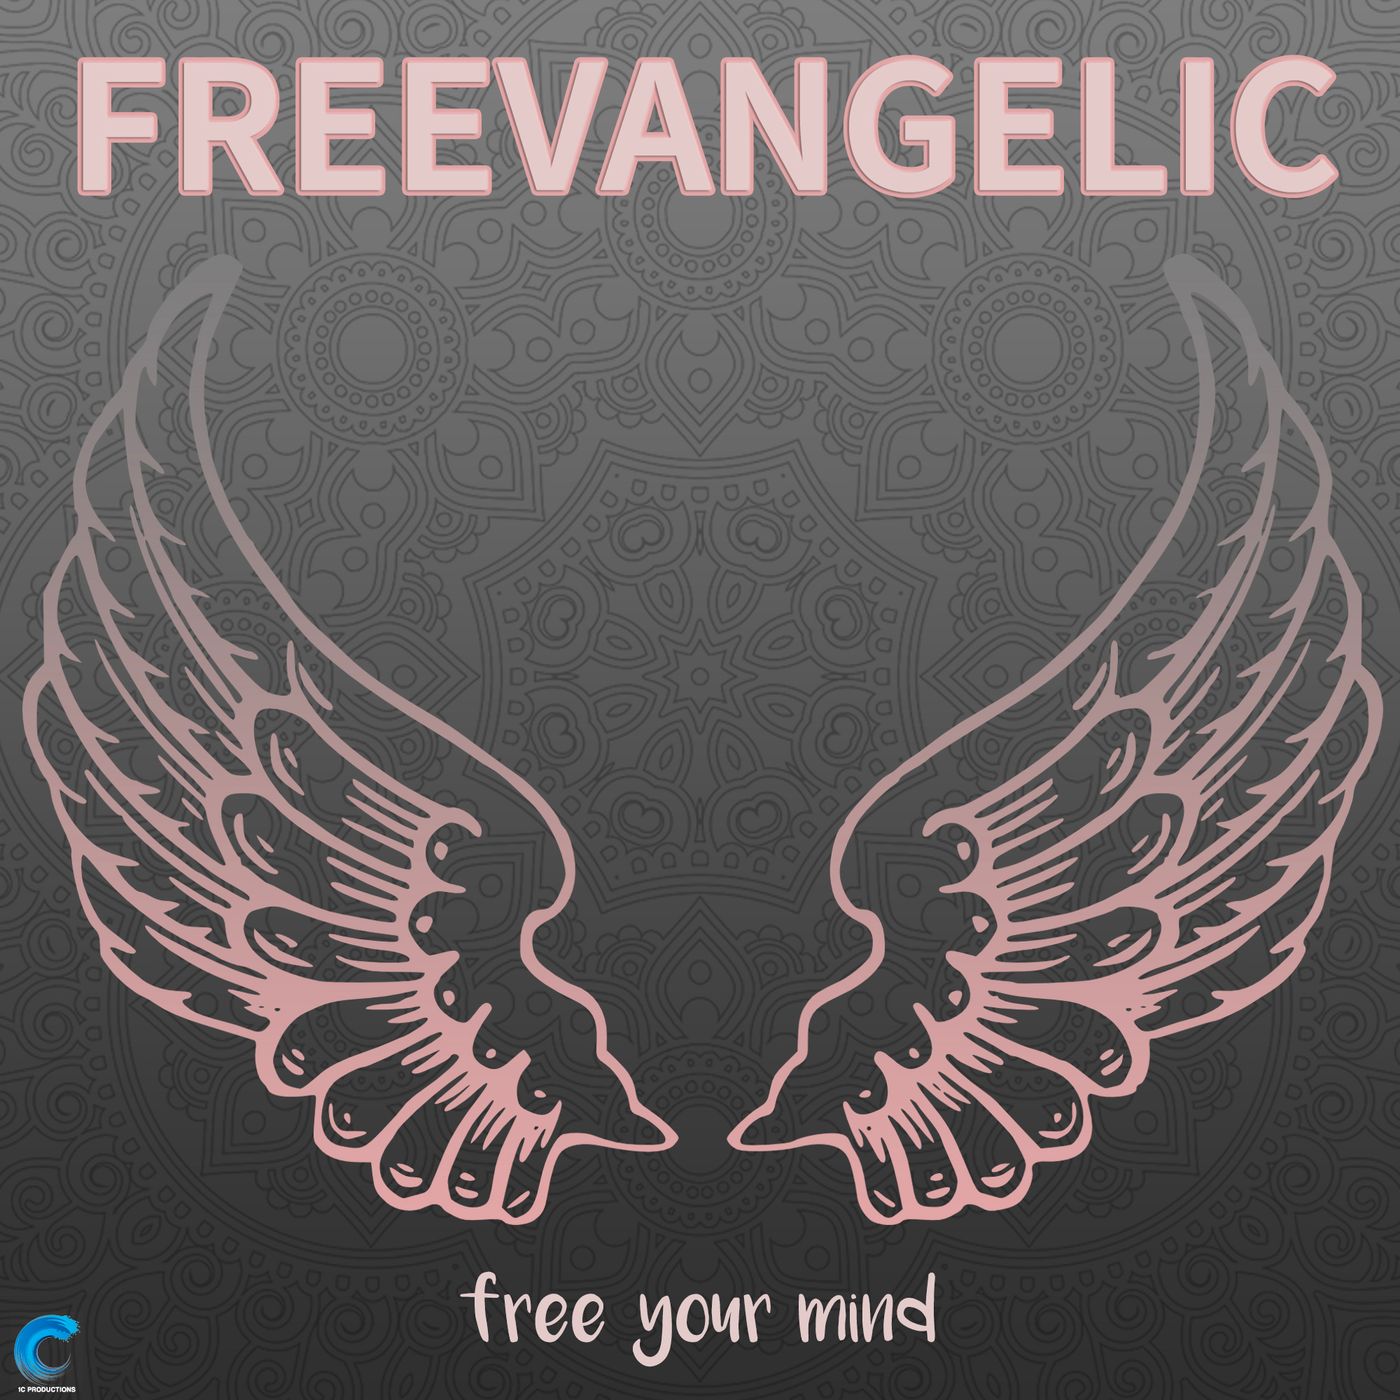 The Freevangelic Podcast podcast show image